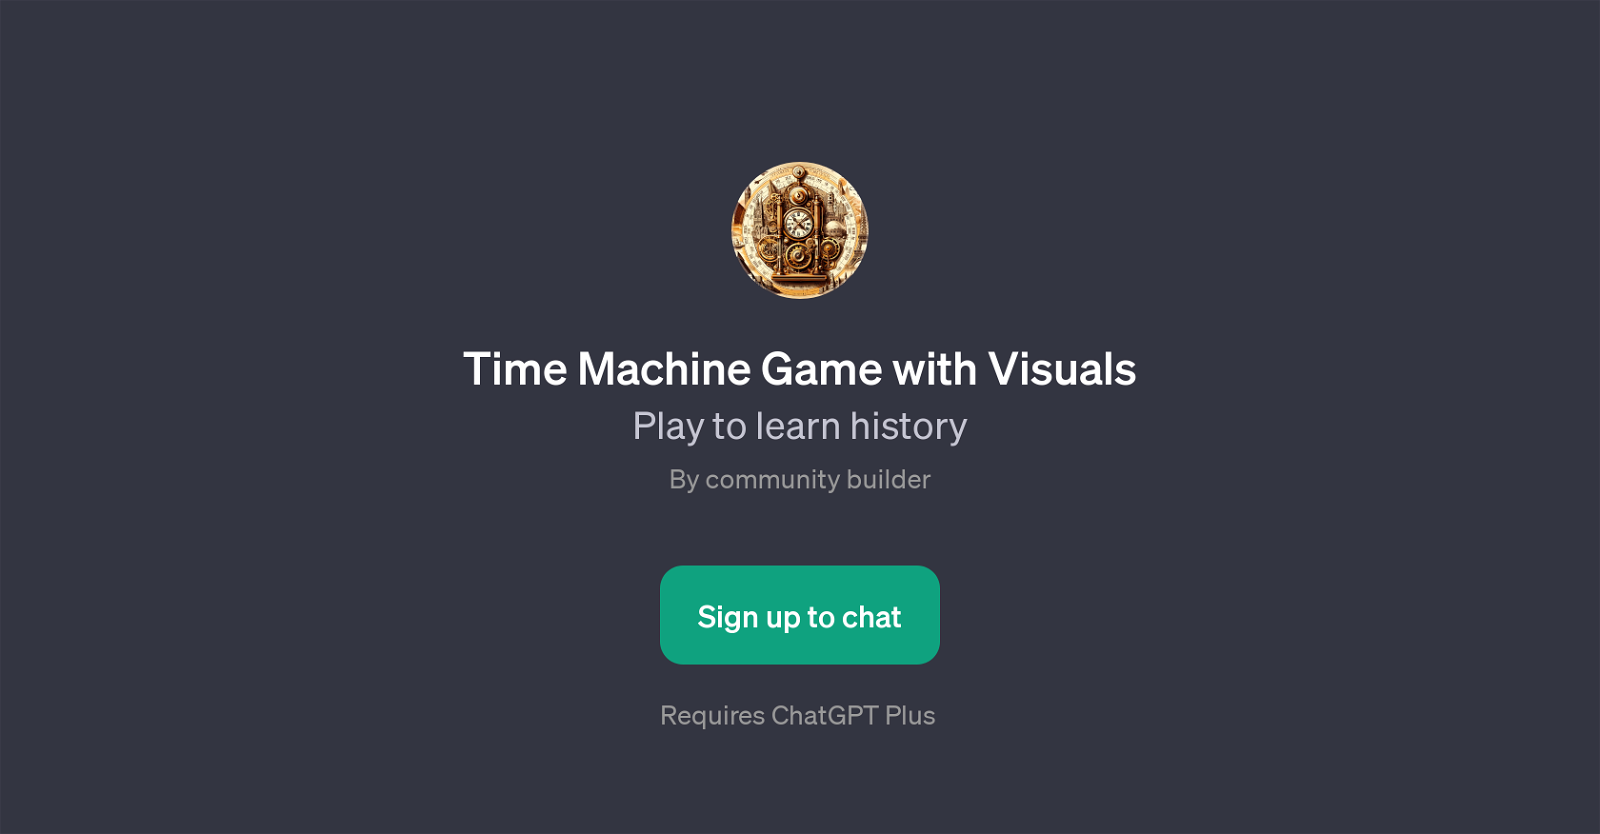 Time Machine Game with Visuals website